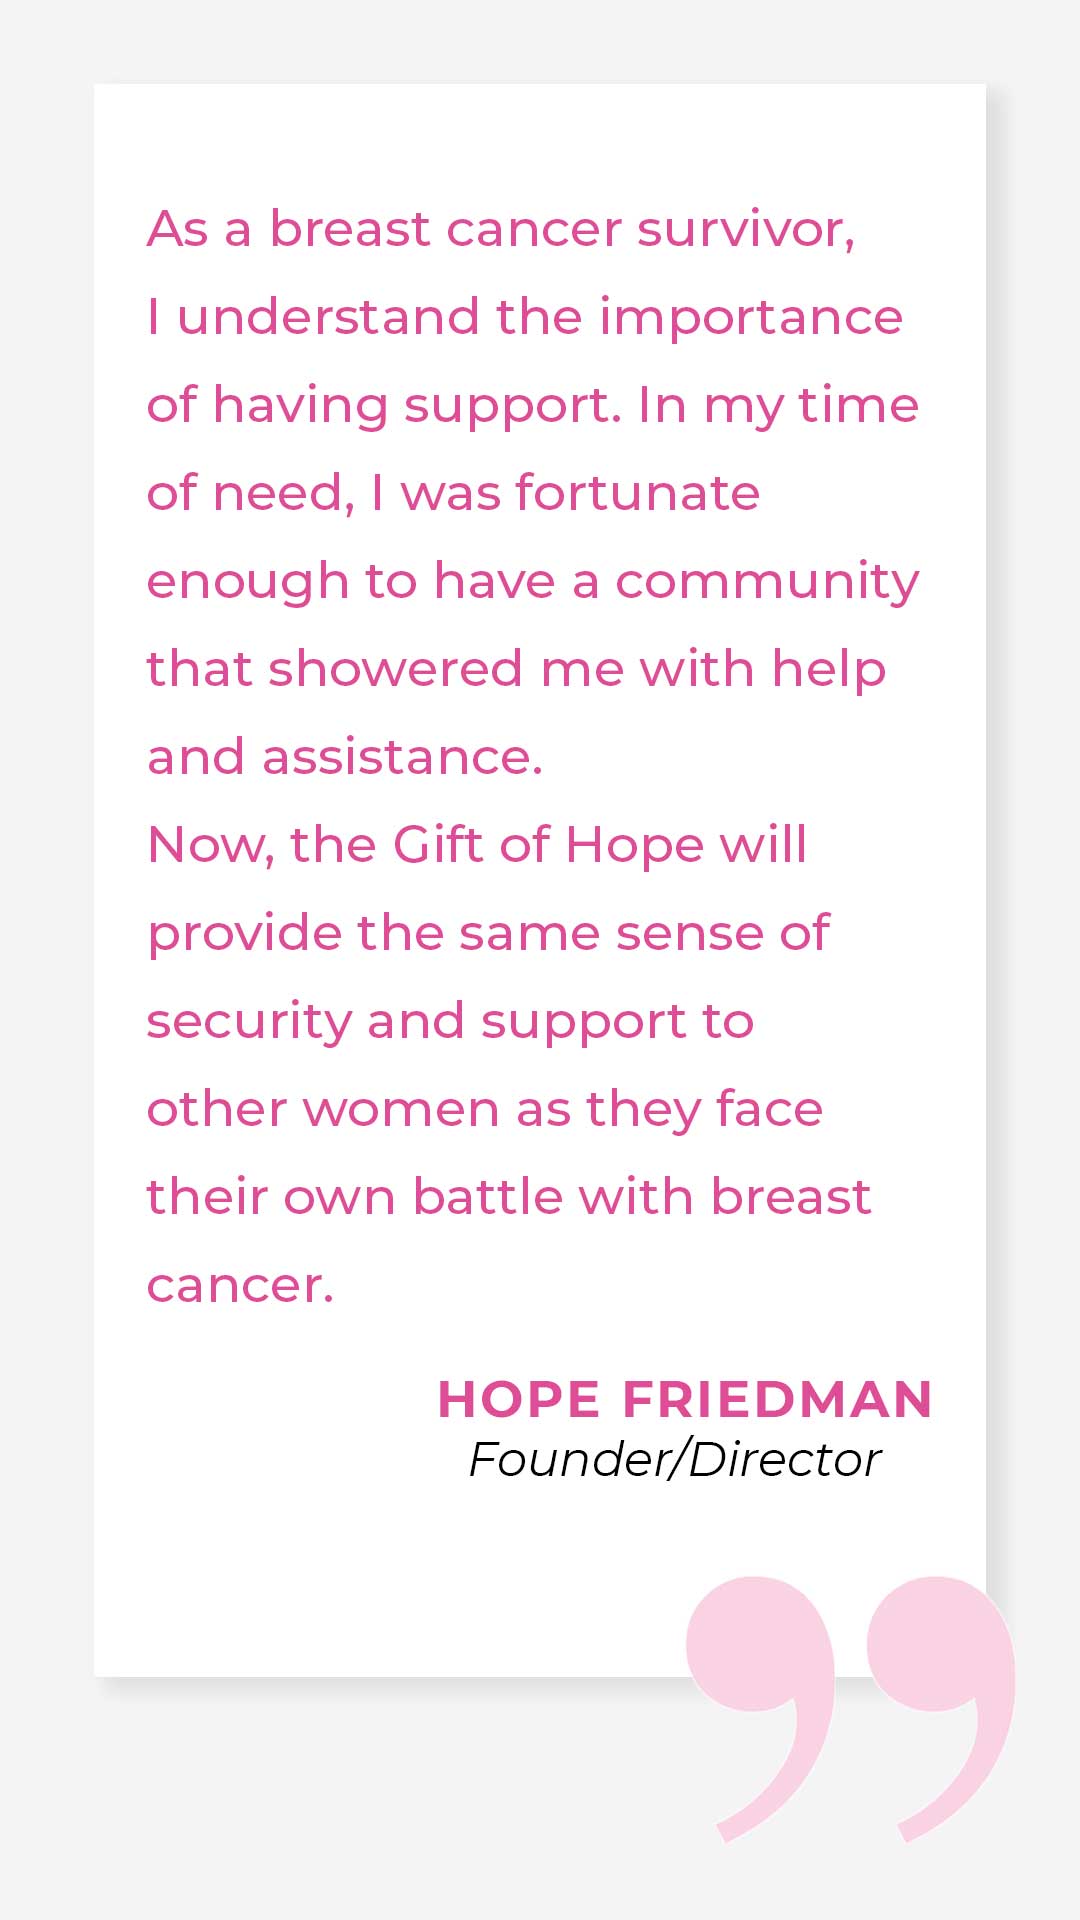 Hope Friedman The Gift of Hope Breast Cancer Foundation